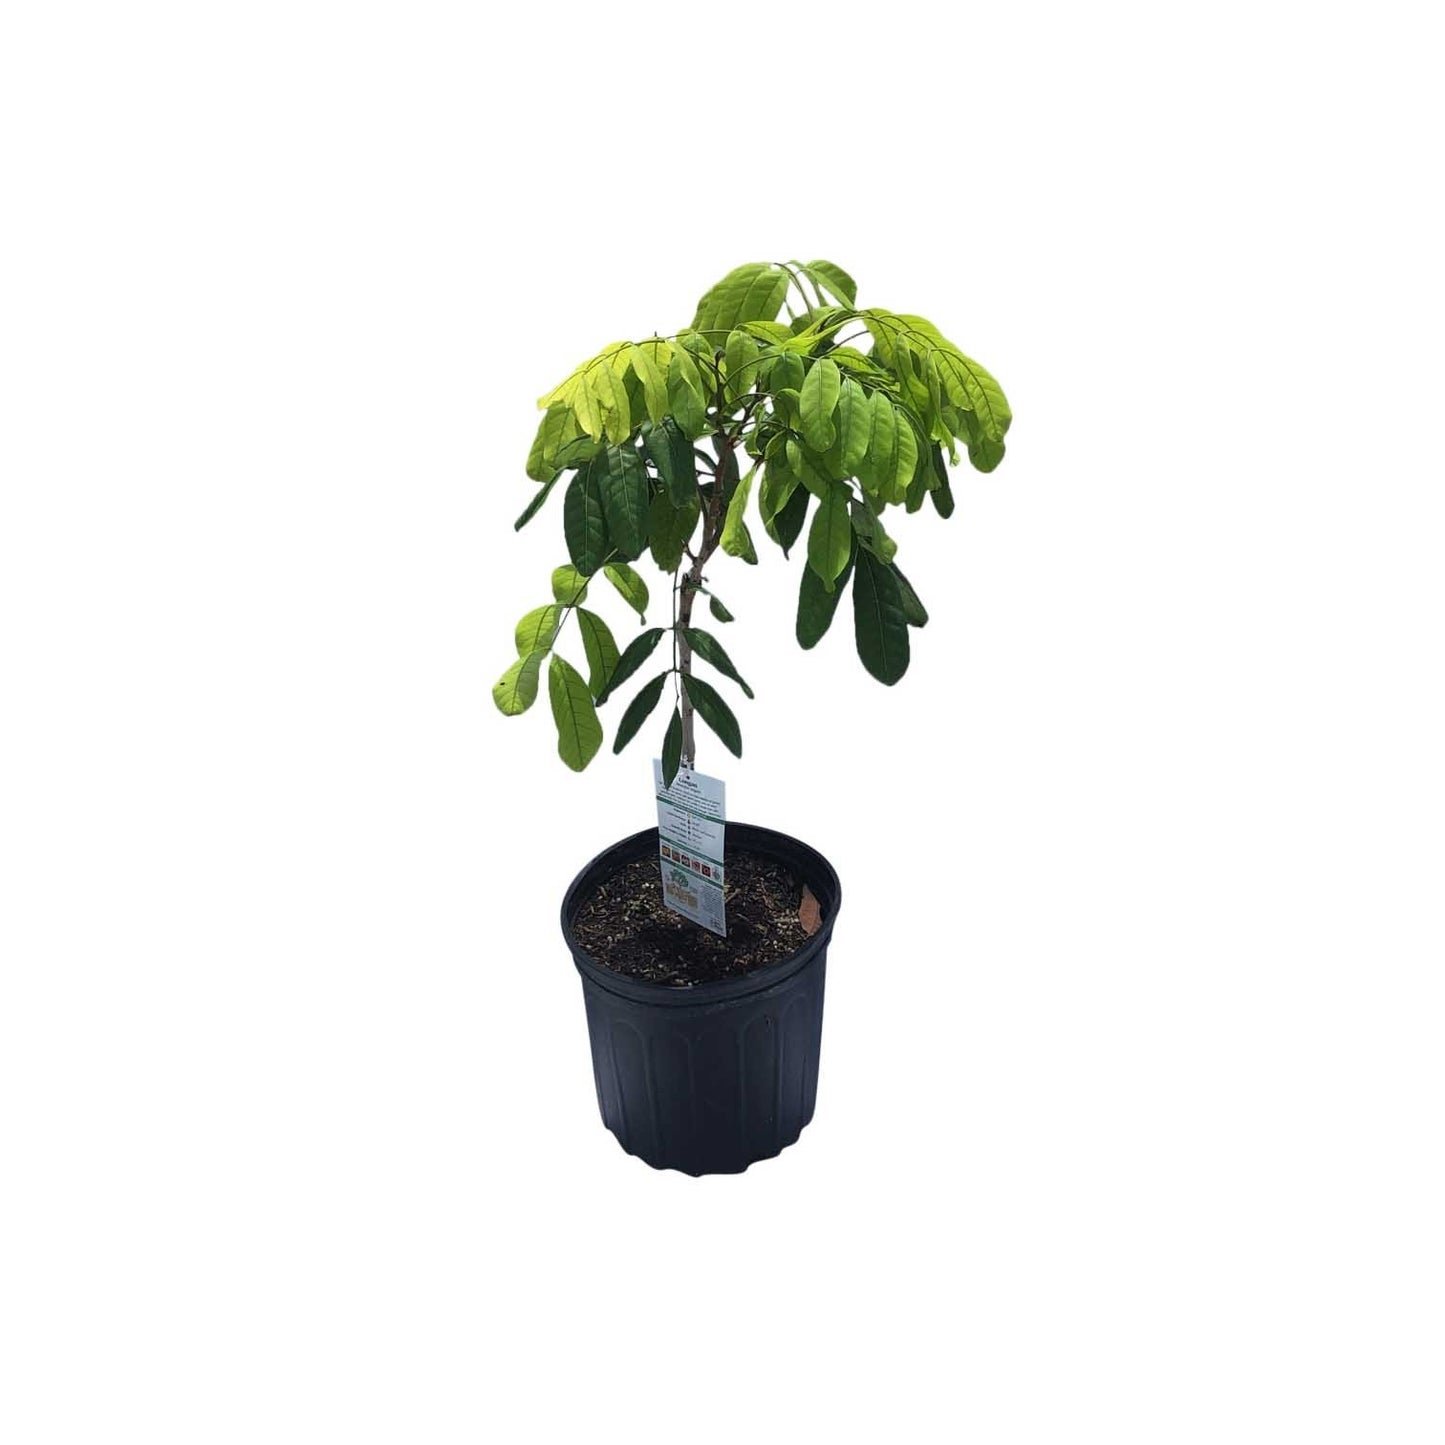 Biew Kiew Longan Tree, Air Layered, 3-Gal Container from Florida